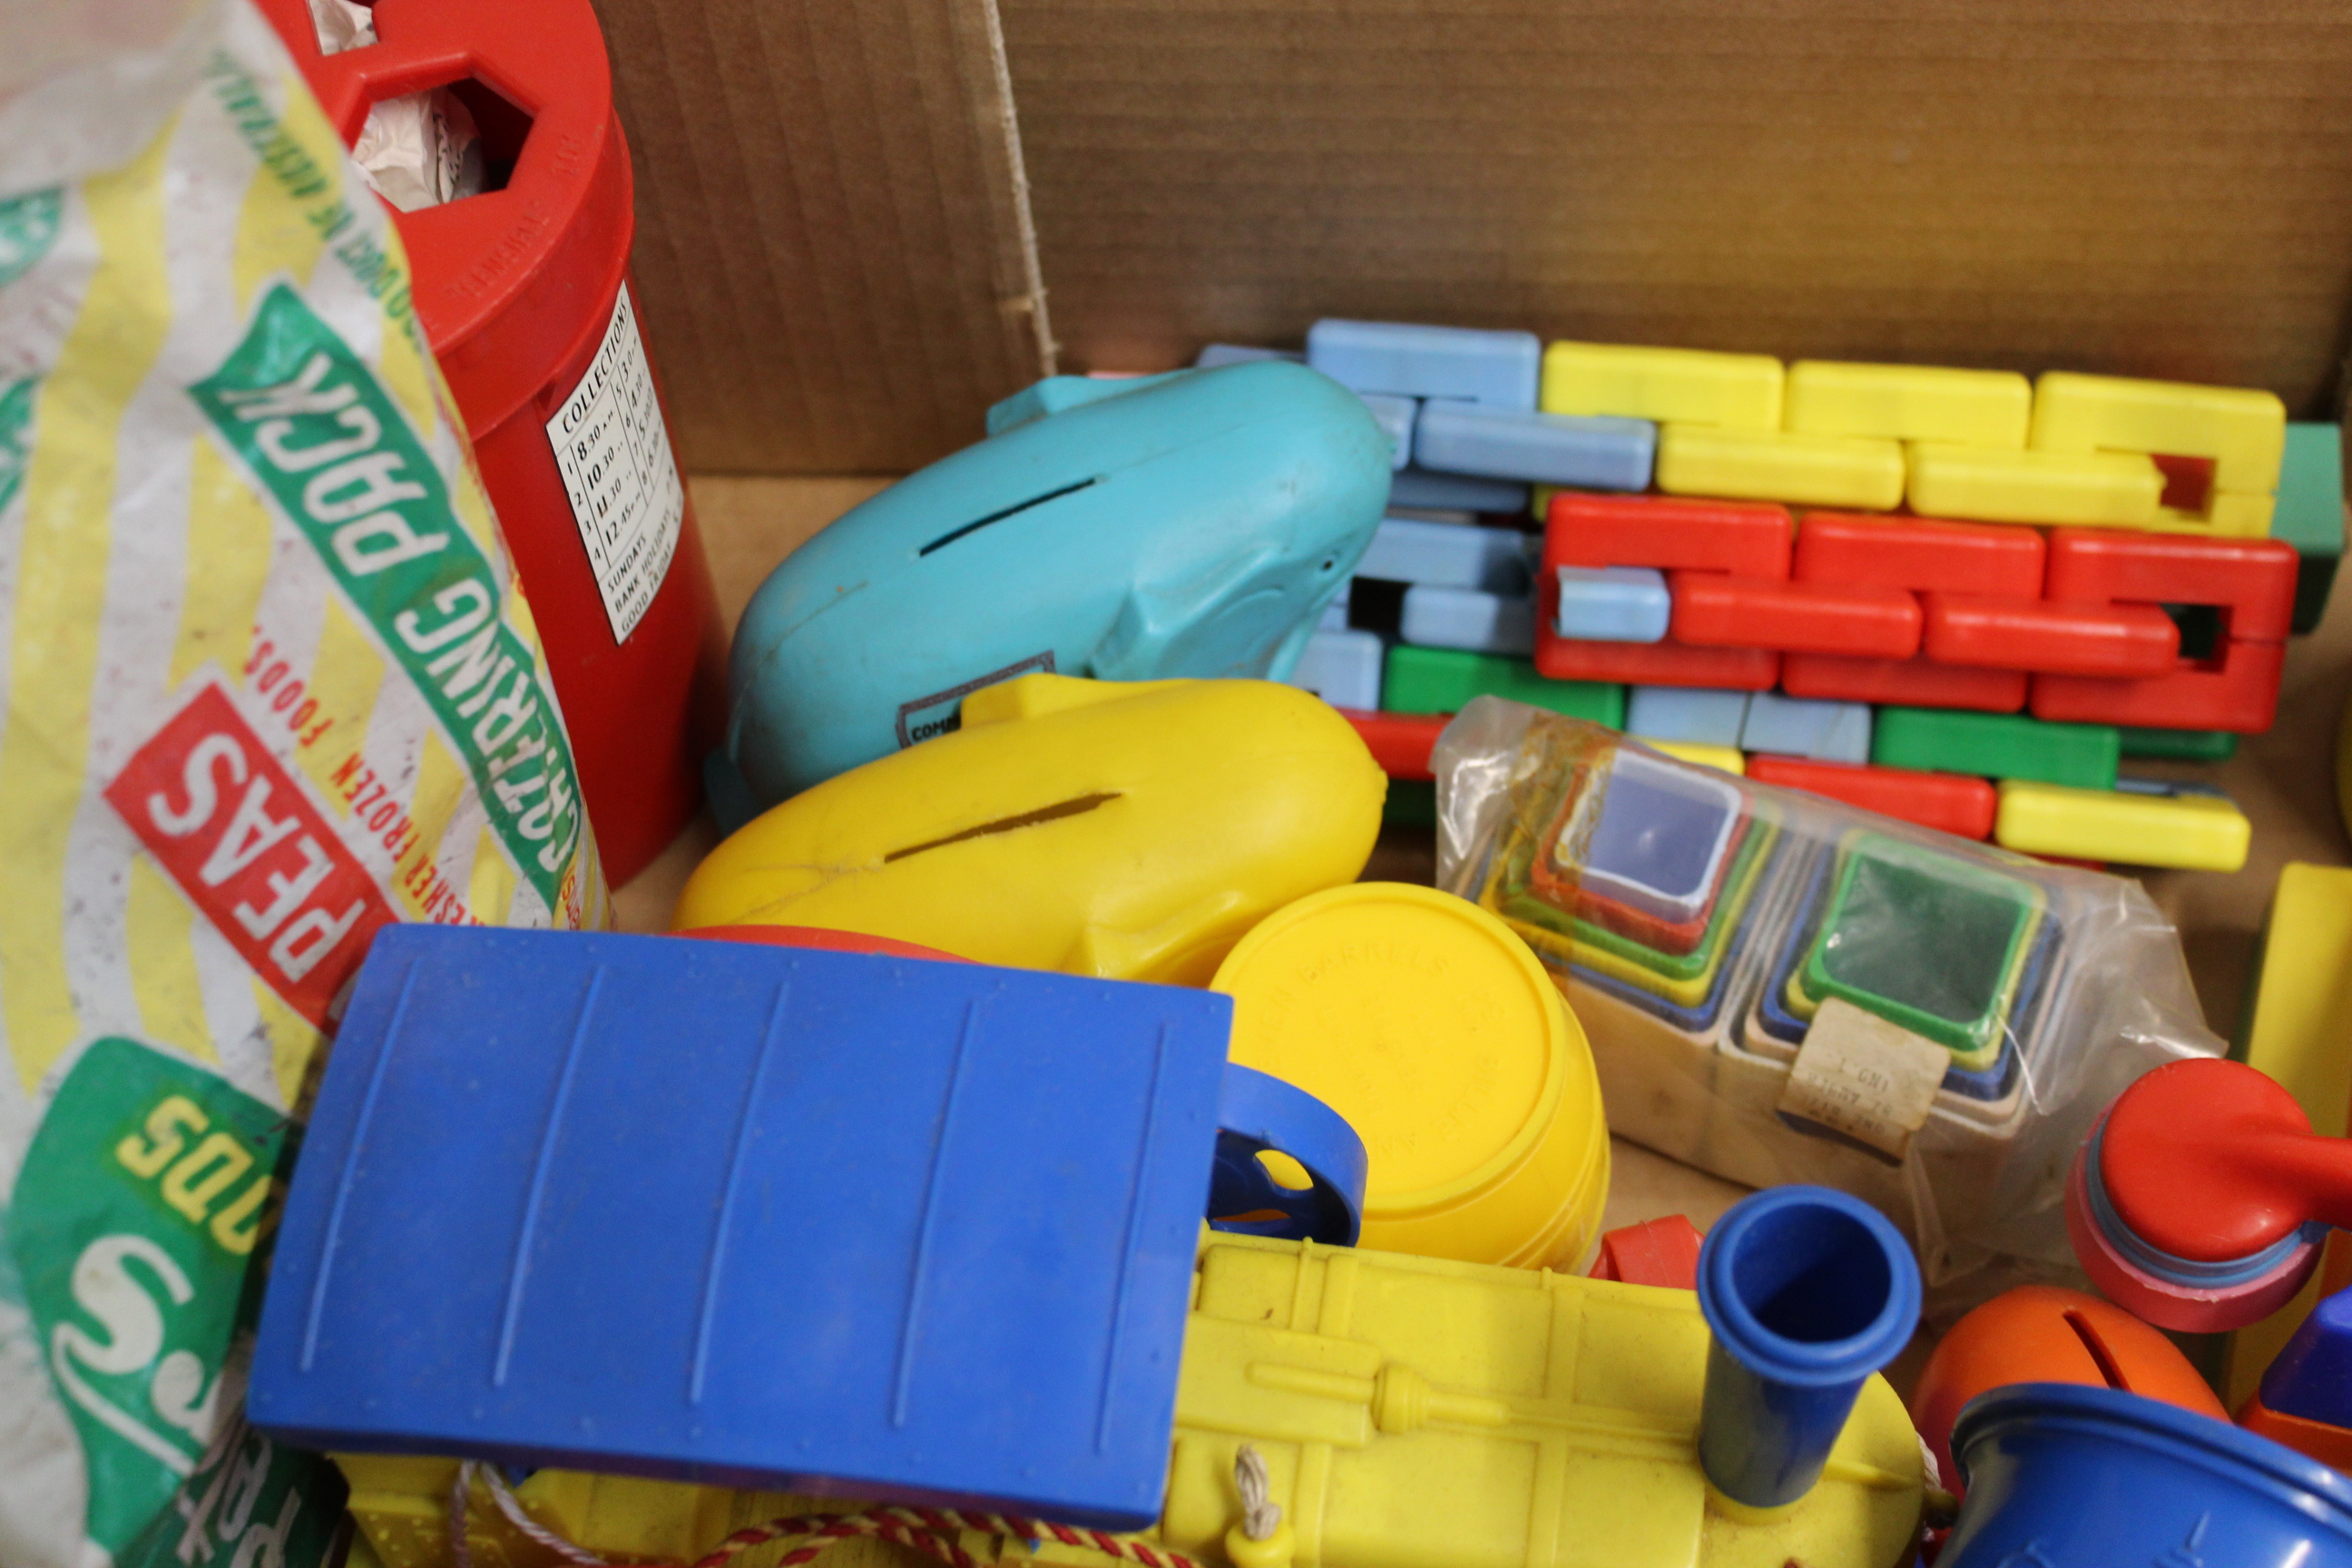 A box of mixed childrens play/learning toys - Image 3 of 3